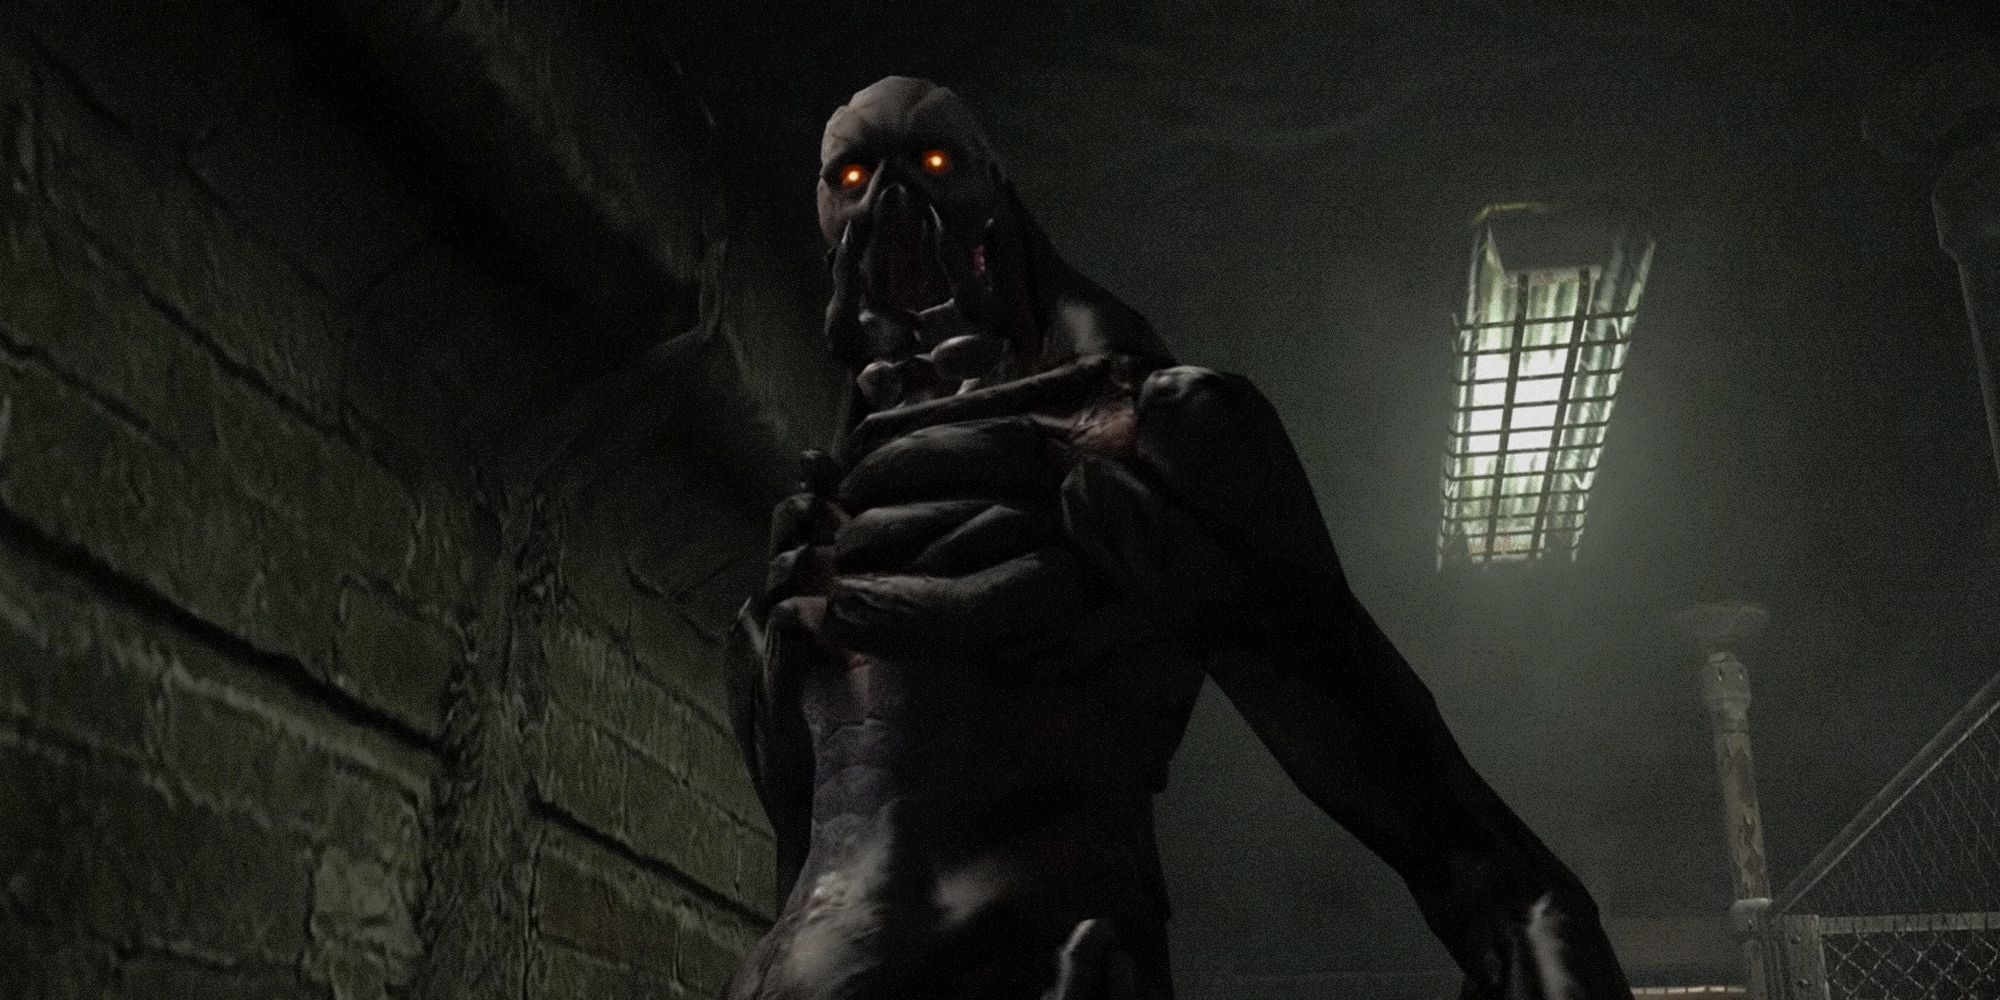 Resident Evil 4 Verdugo. Tall creature with red eyes and very tight skin over its bones.